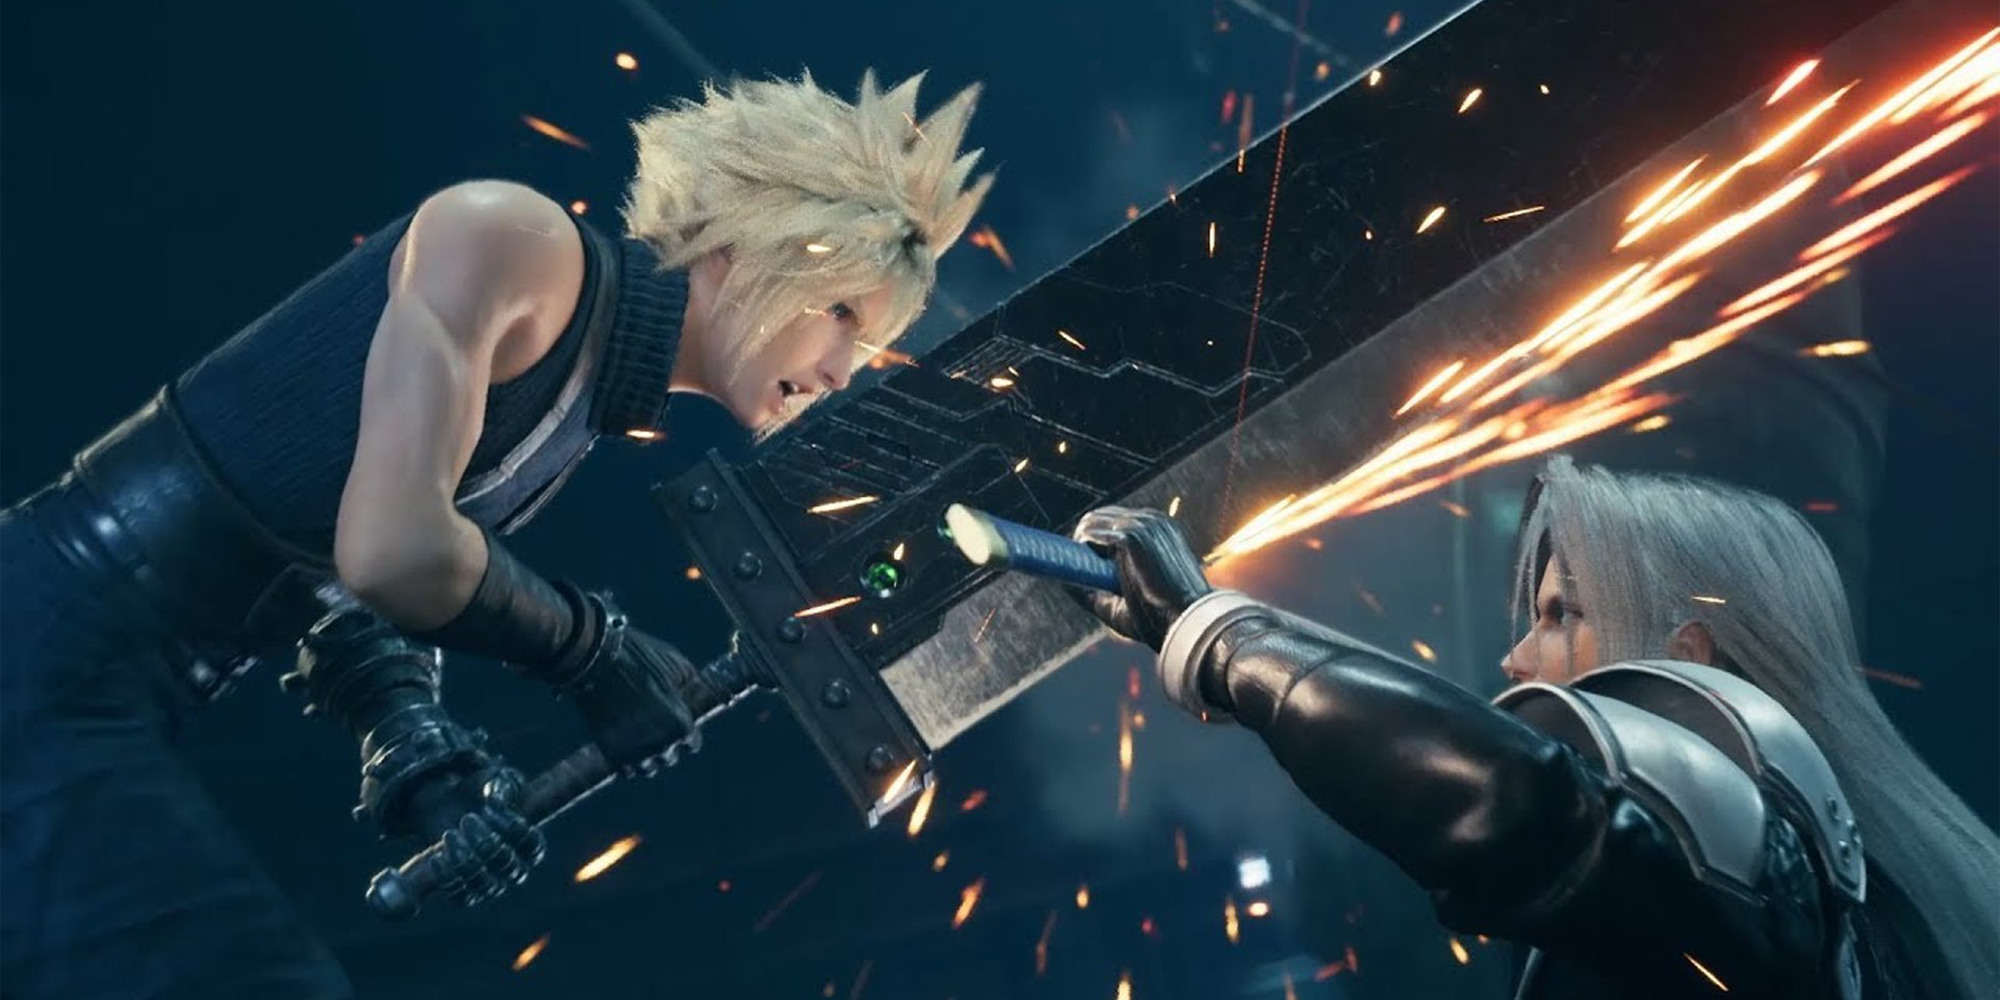  FF7 Remake  Side Missions And Story Missions Have The Same 